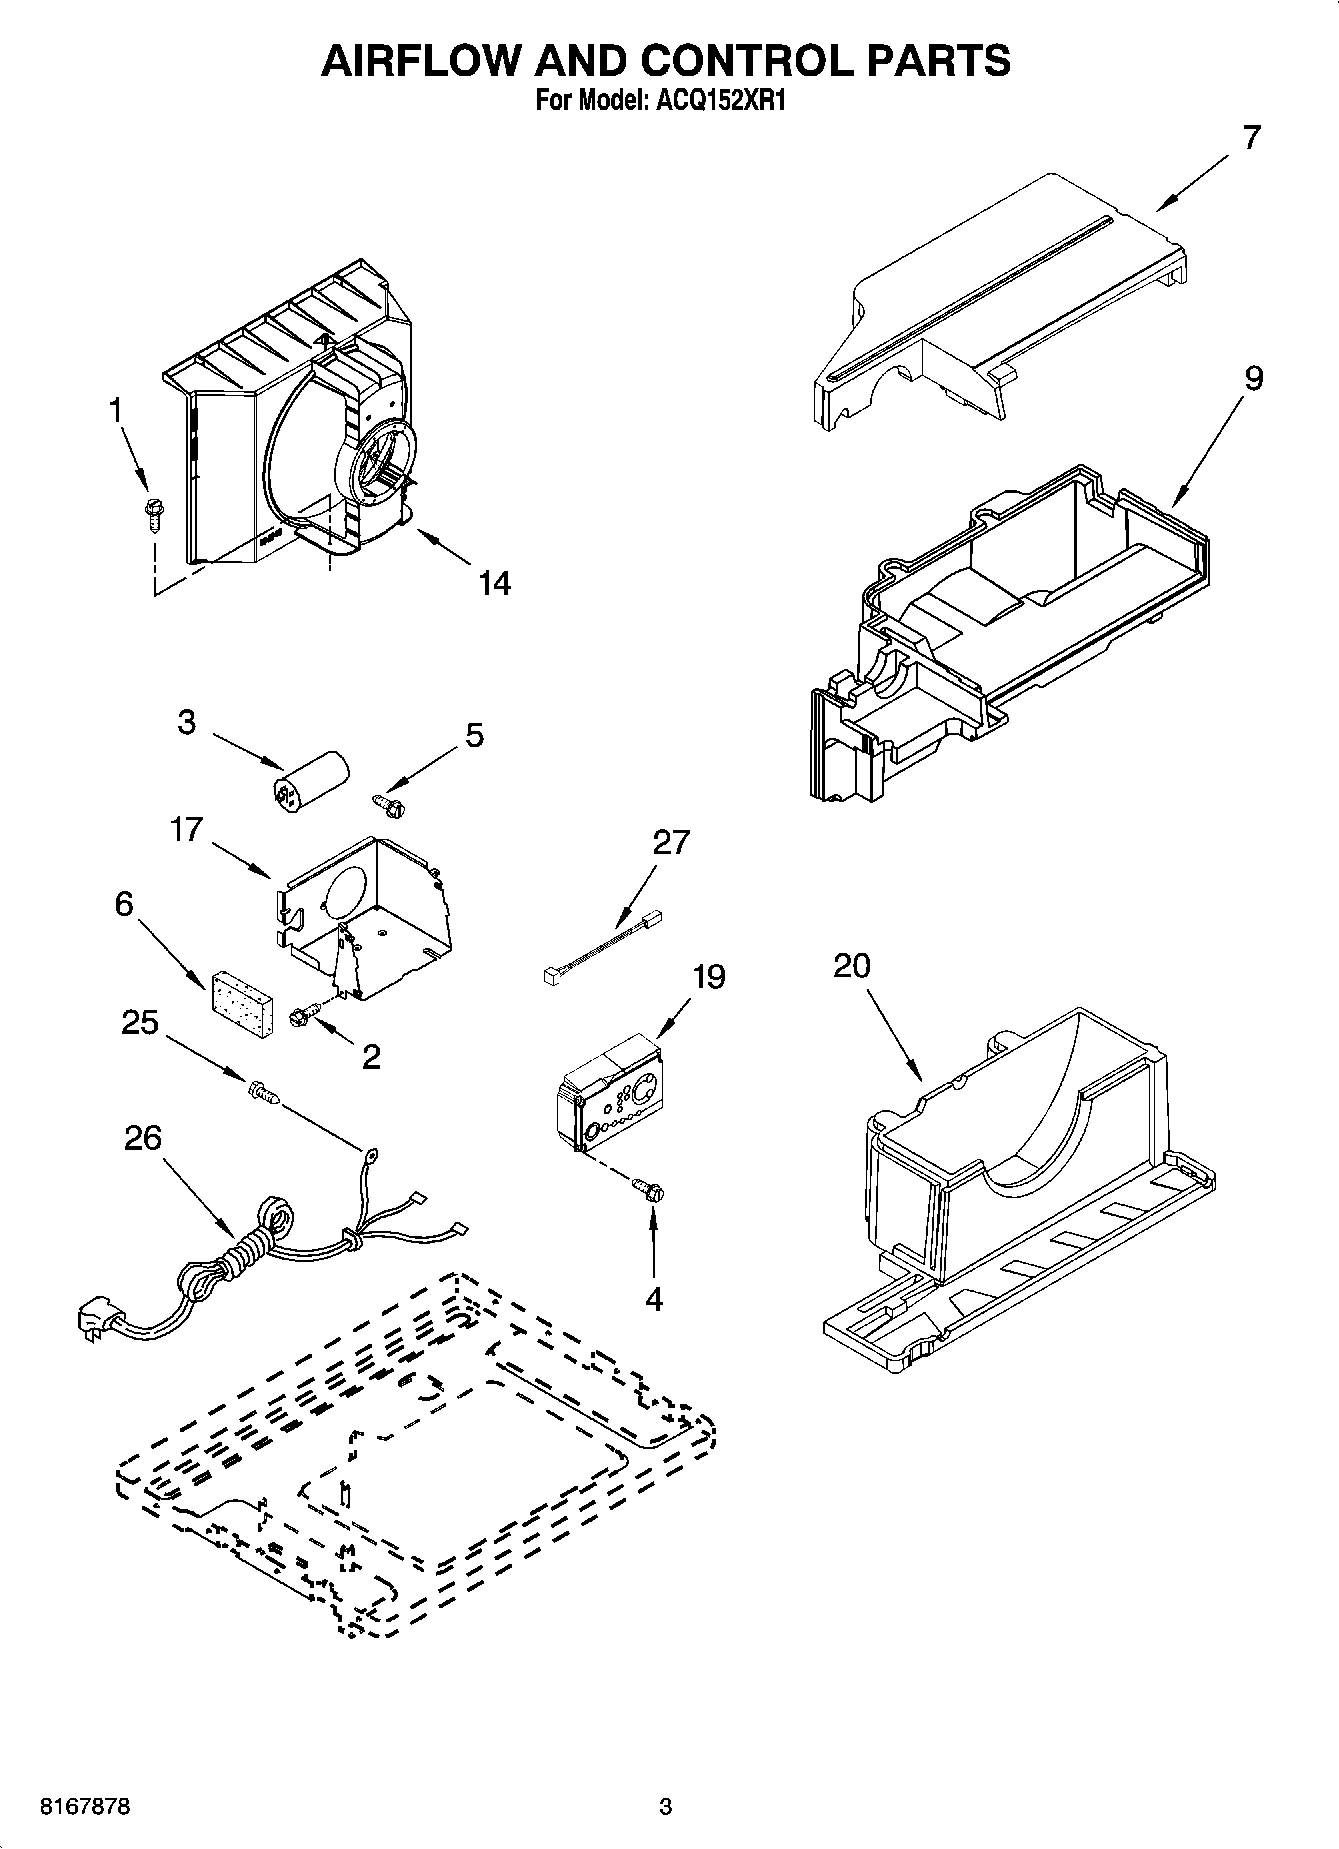 02 - AIRFLOW AND CONTROL PARTS